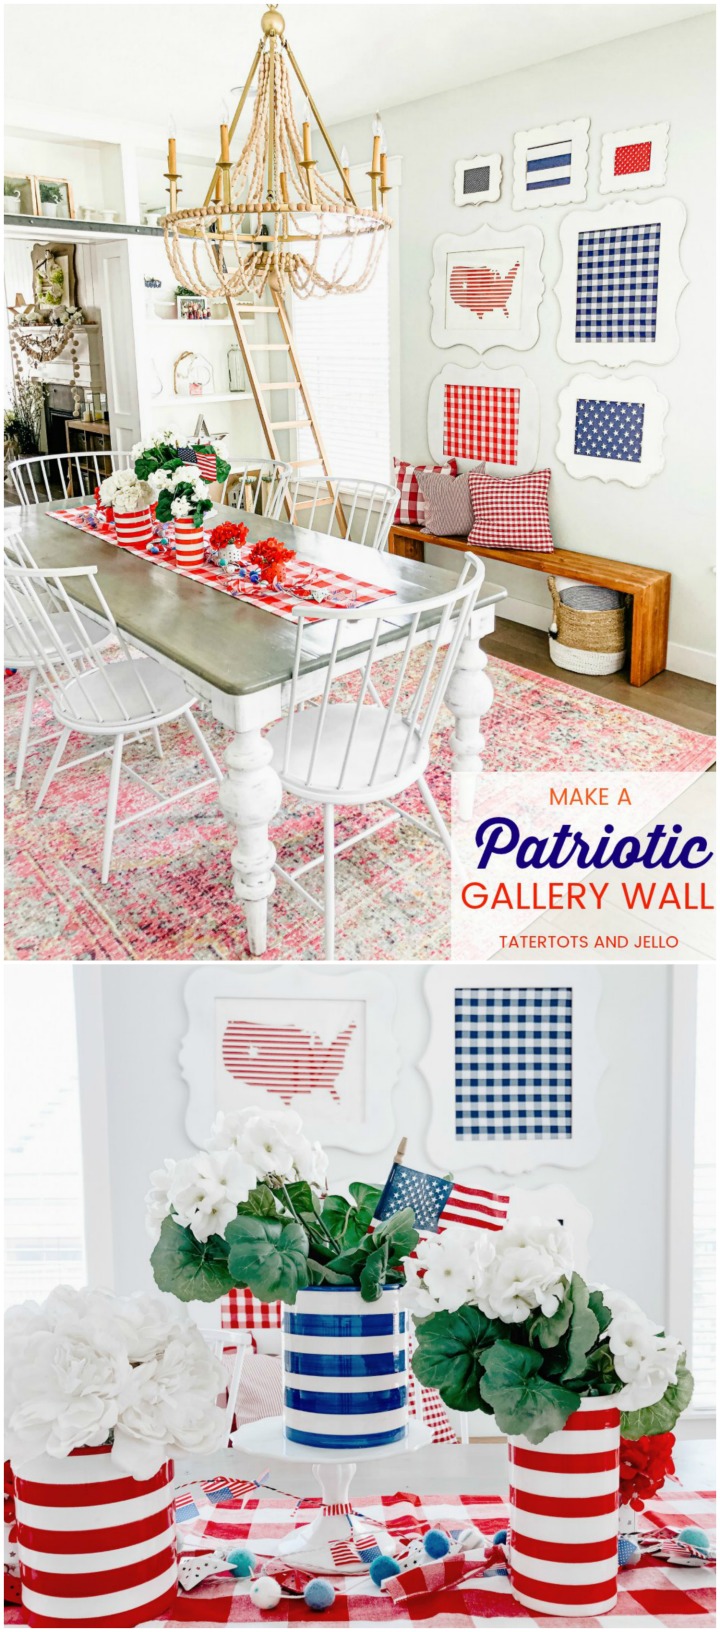 Fourth of July red white and blue gallery wall DIY. Show off red white and blue fabrics in thrifted frames to create a festive statement wall in any room in your home!